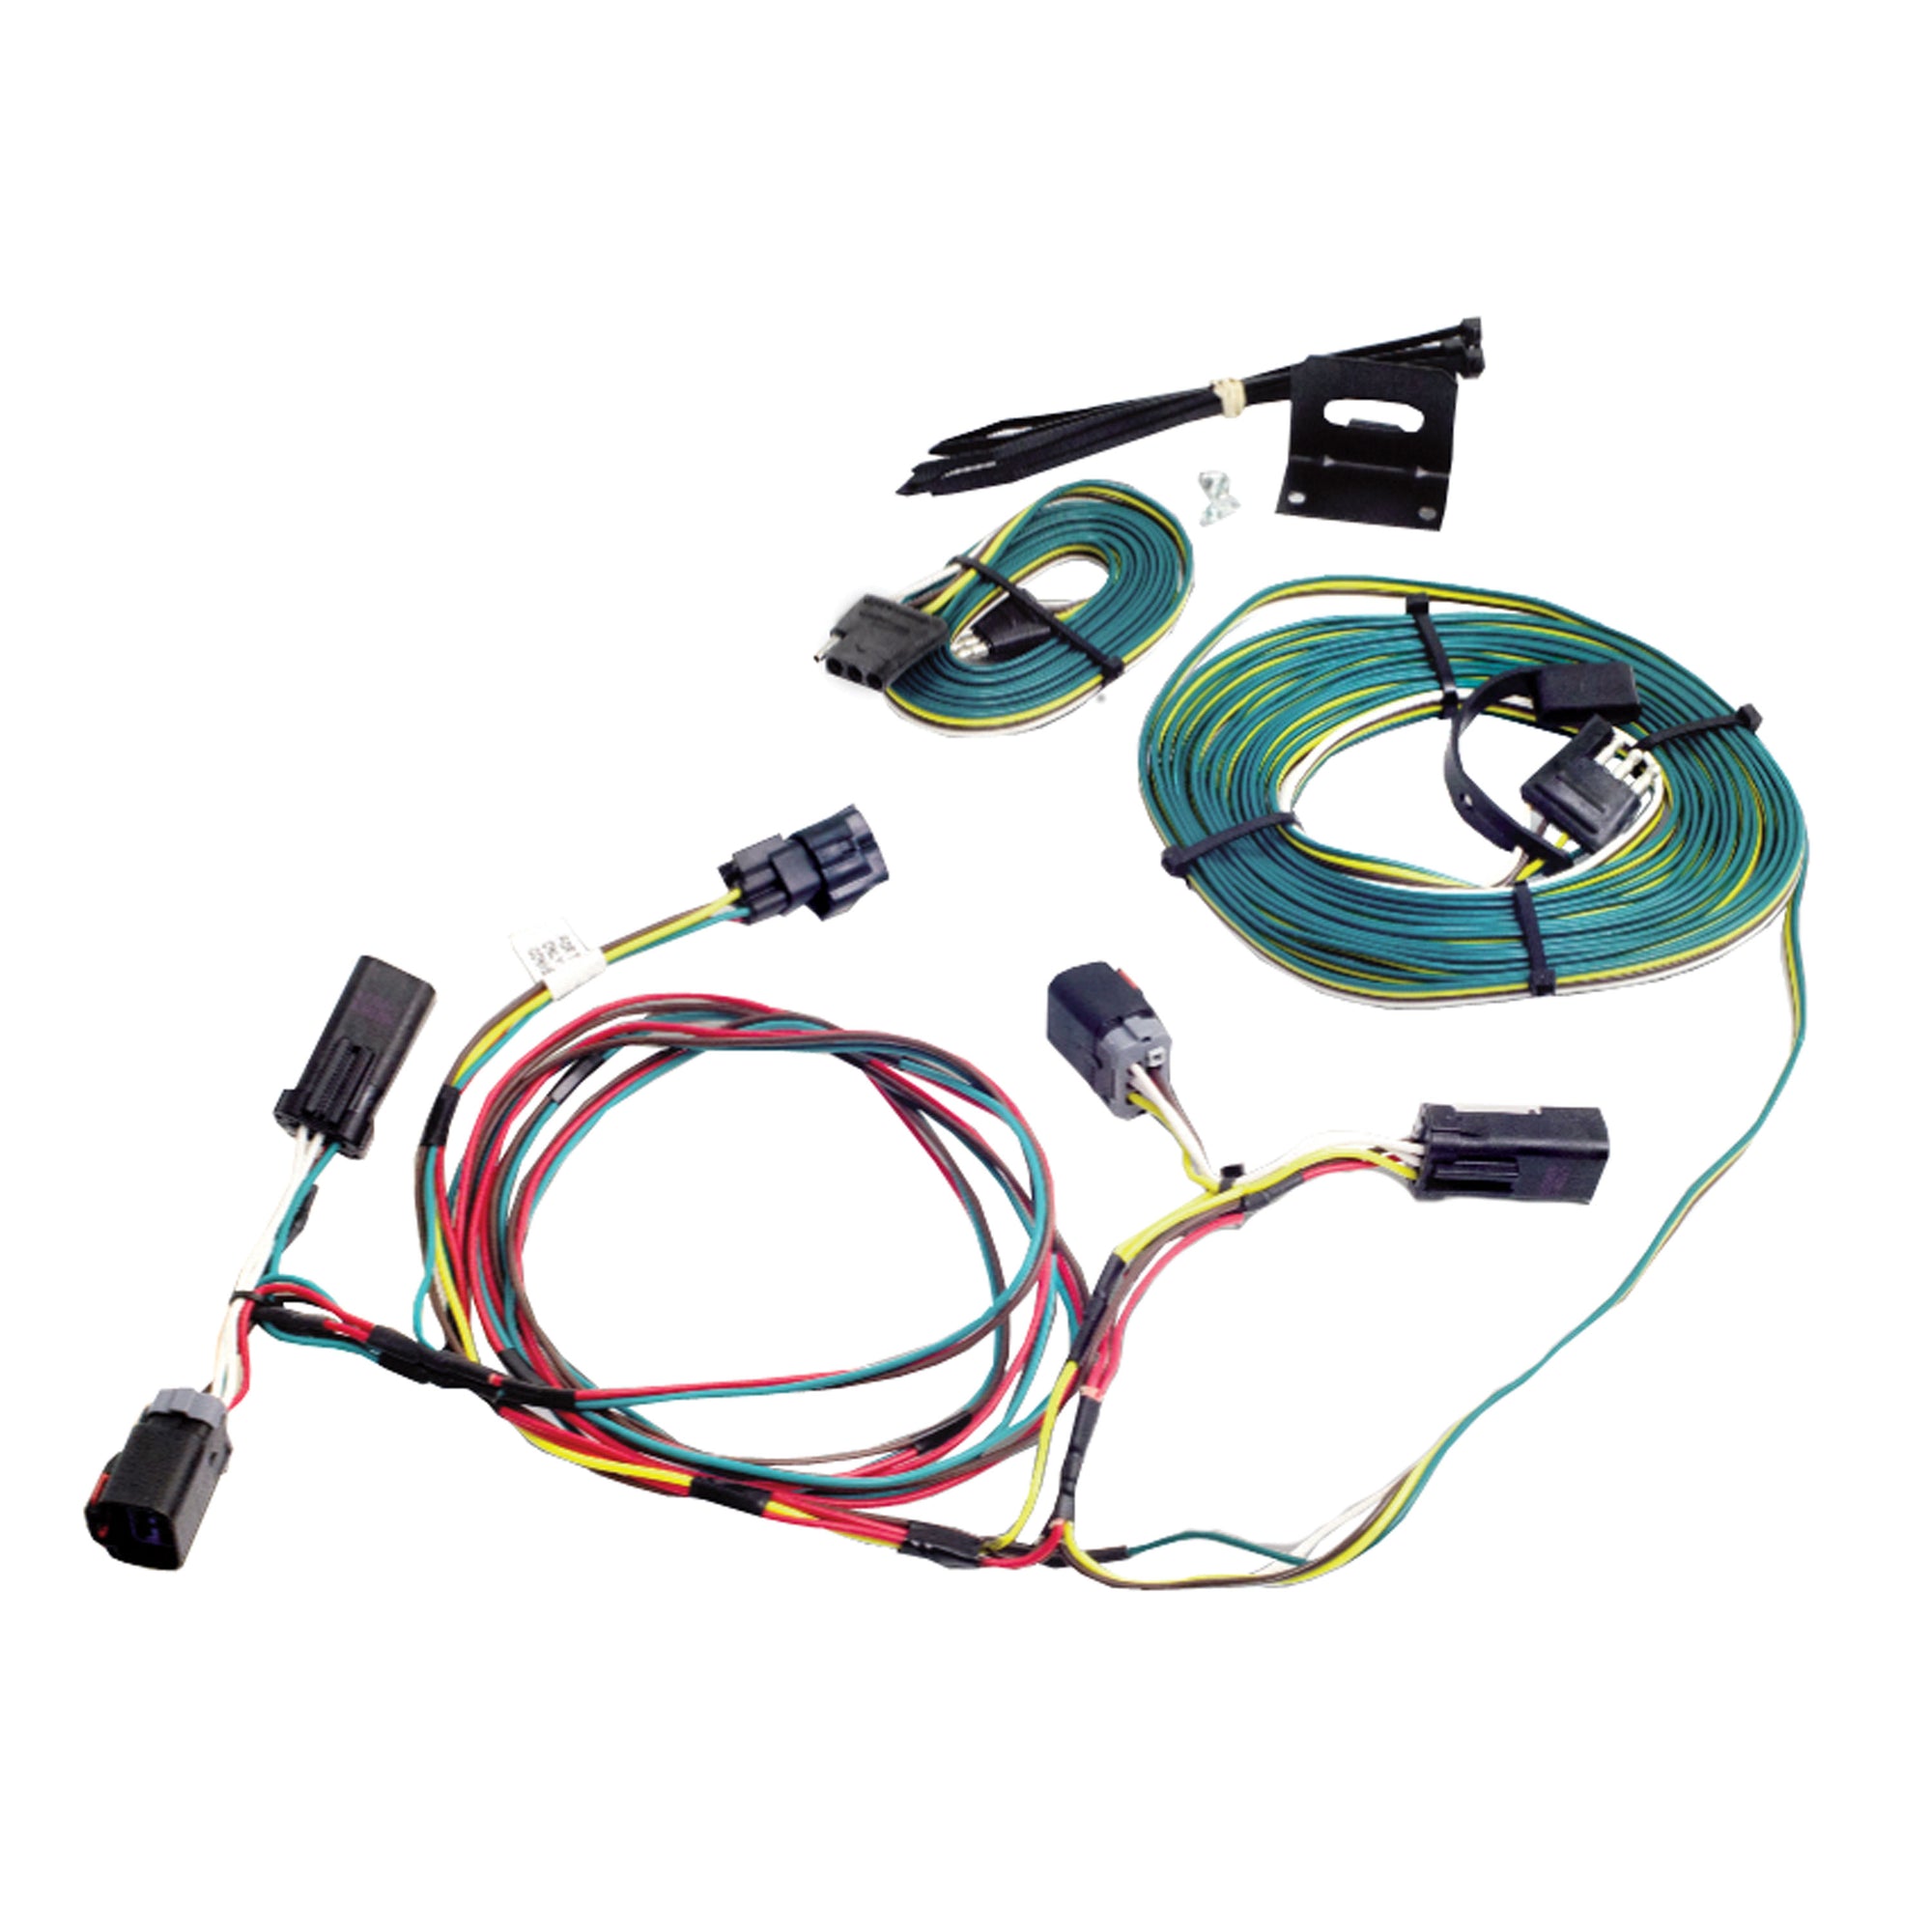 Demco 9523090 Towed Connector Vehicle Wiring Kit - For Jeep Grand Cherokee '05-'06